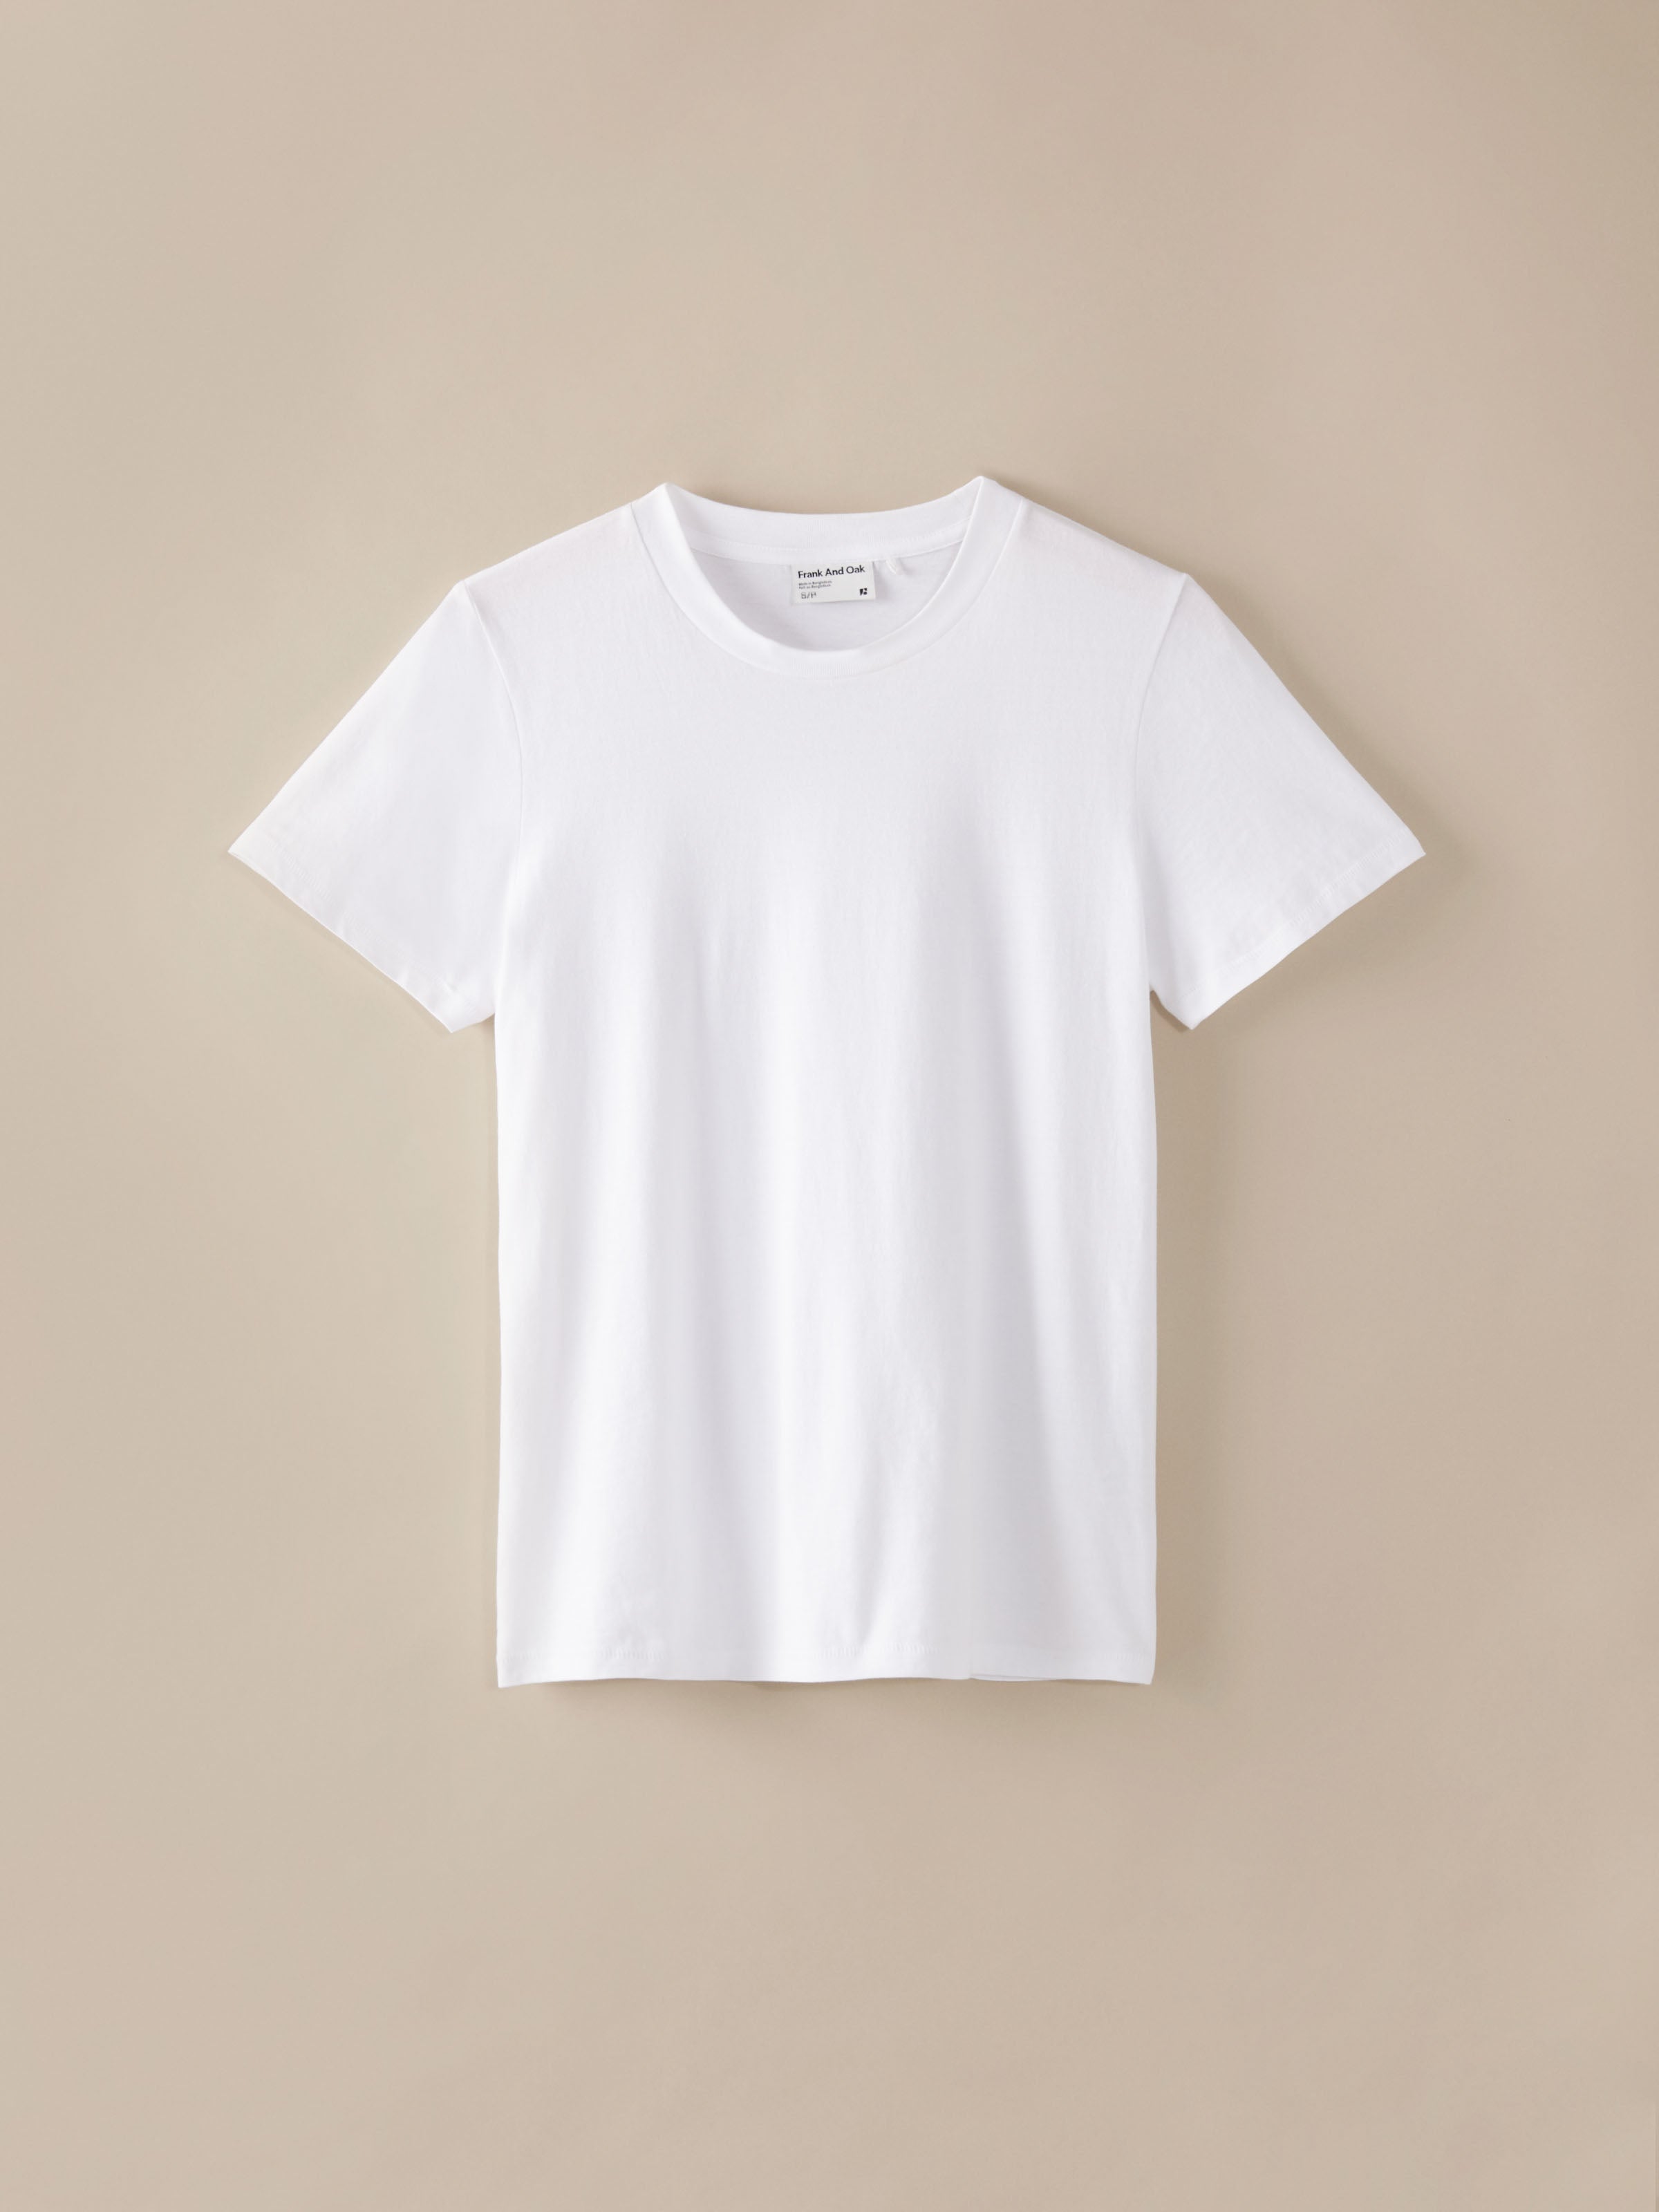 Frank and Oak The Essential T-Shirt in Bright White